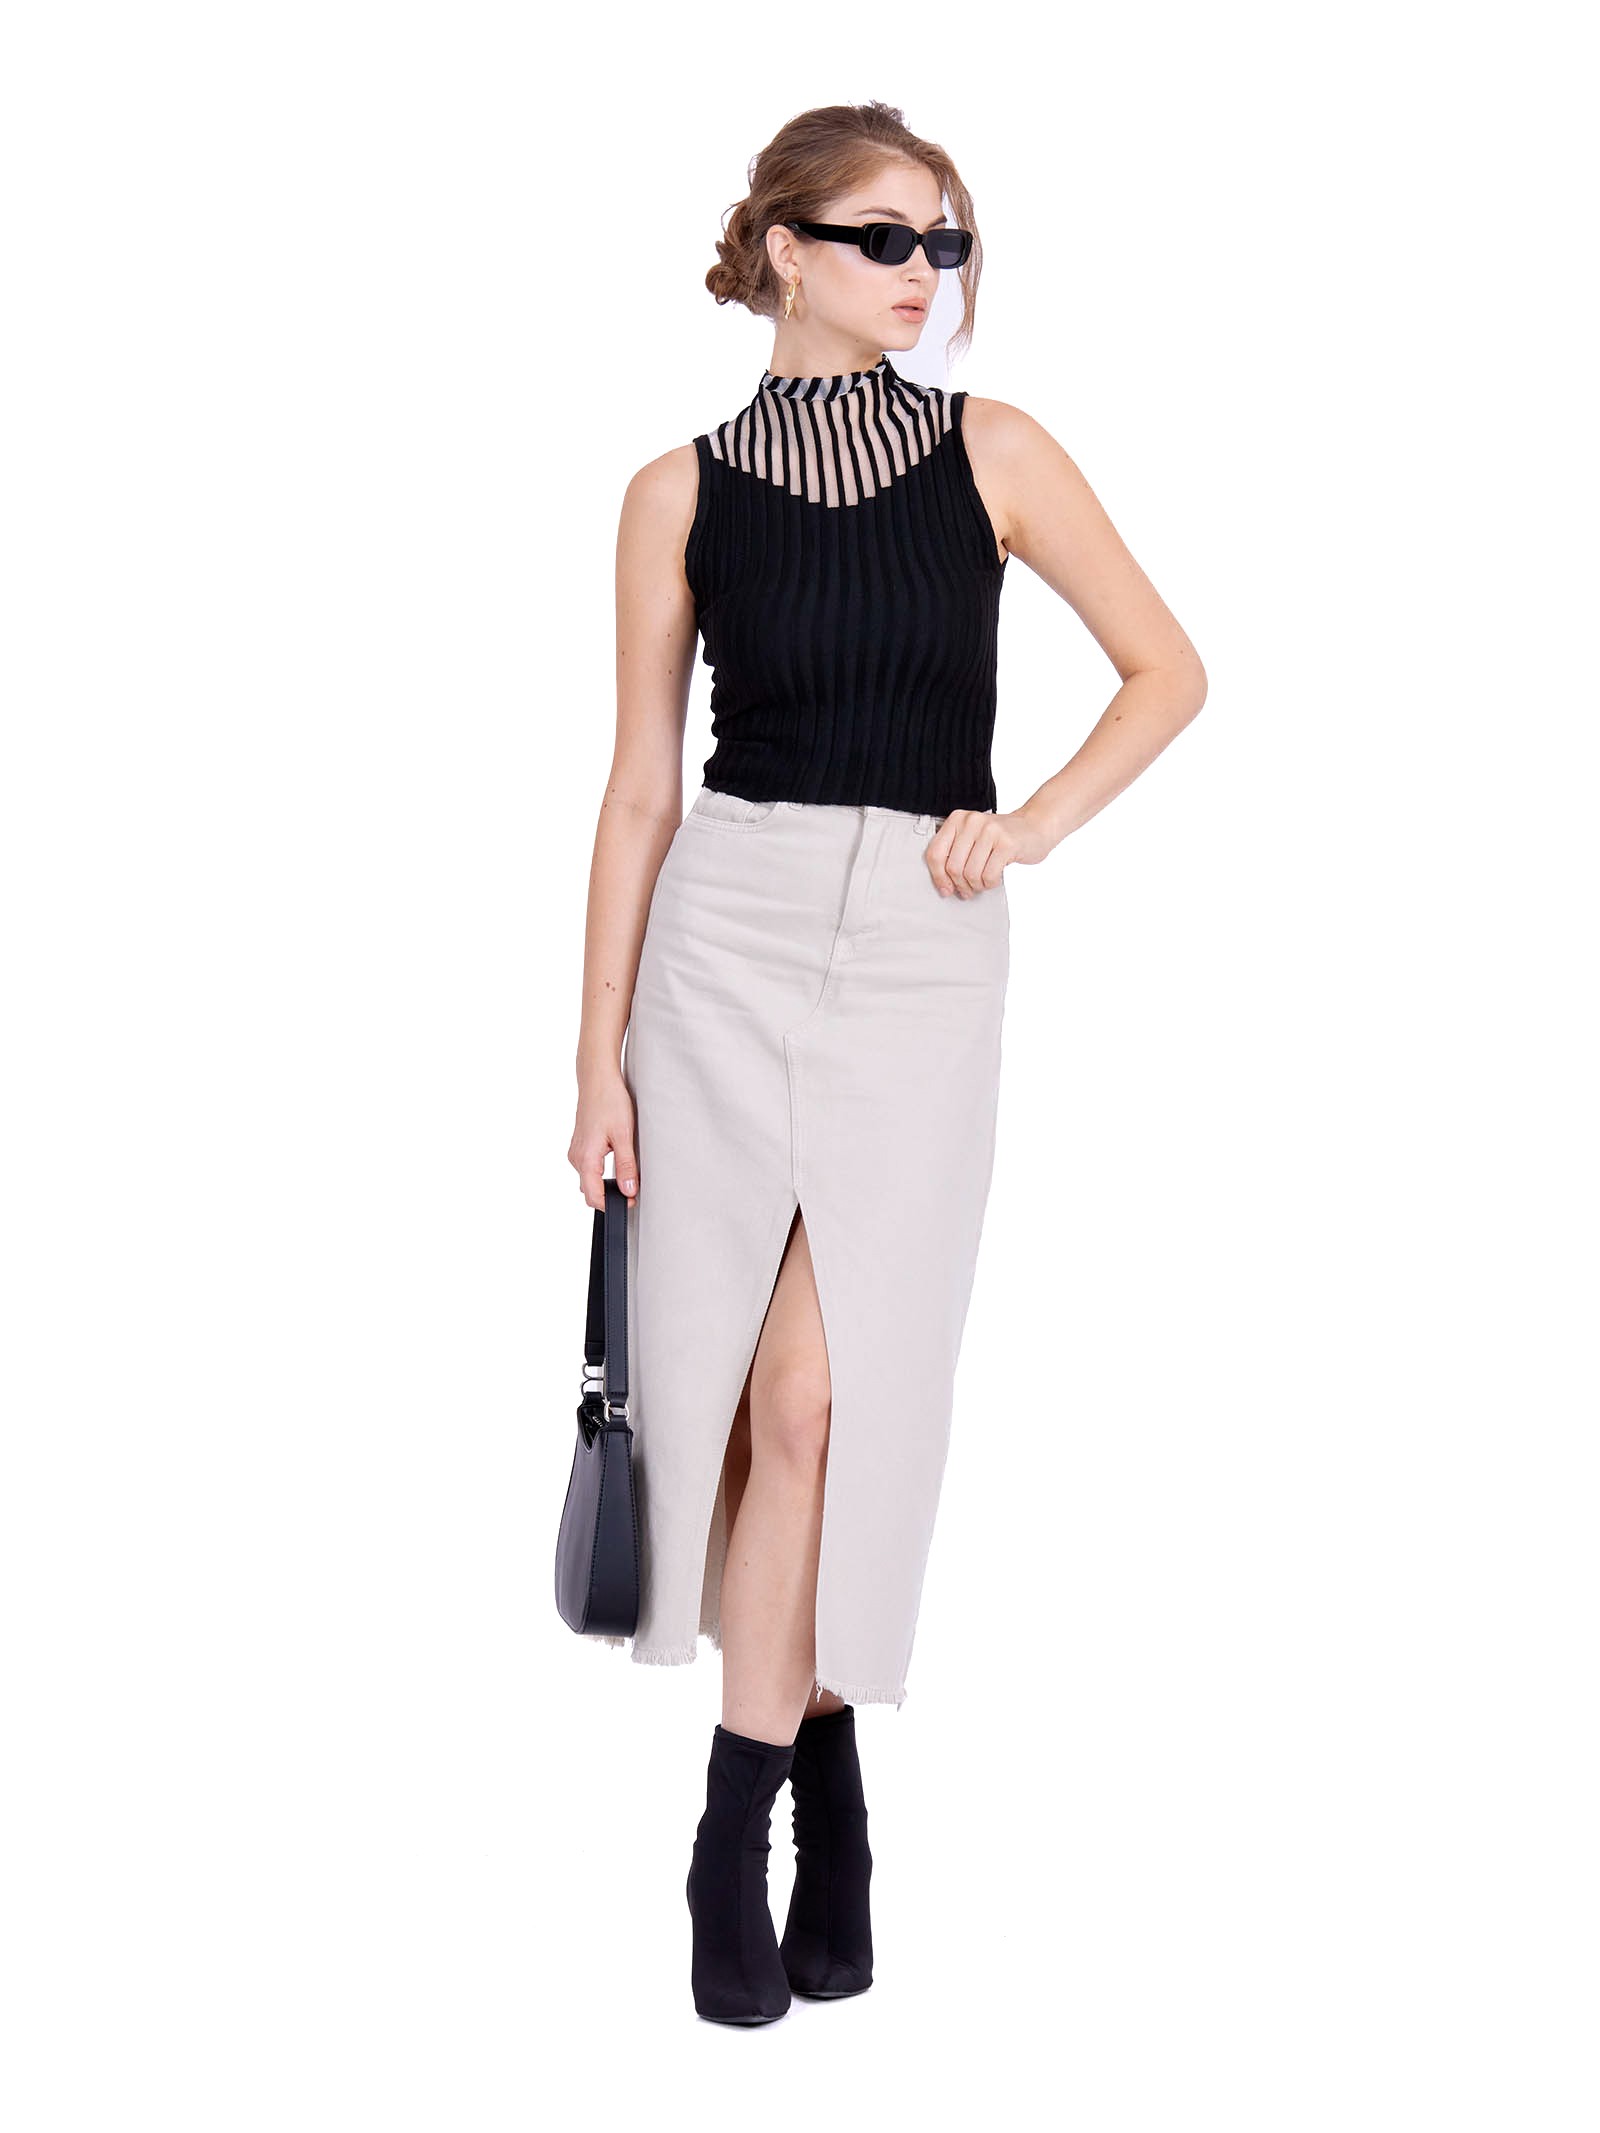 Sleeveless knitted crop top with transparent details on collar Black